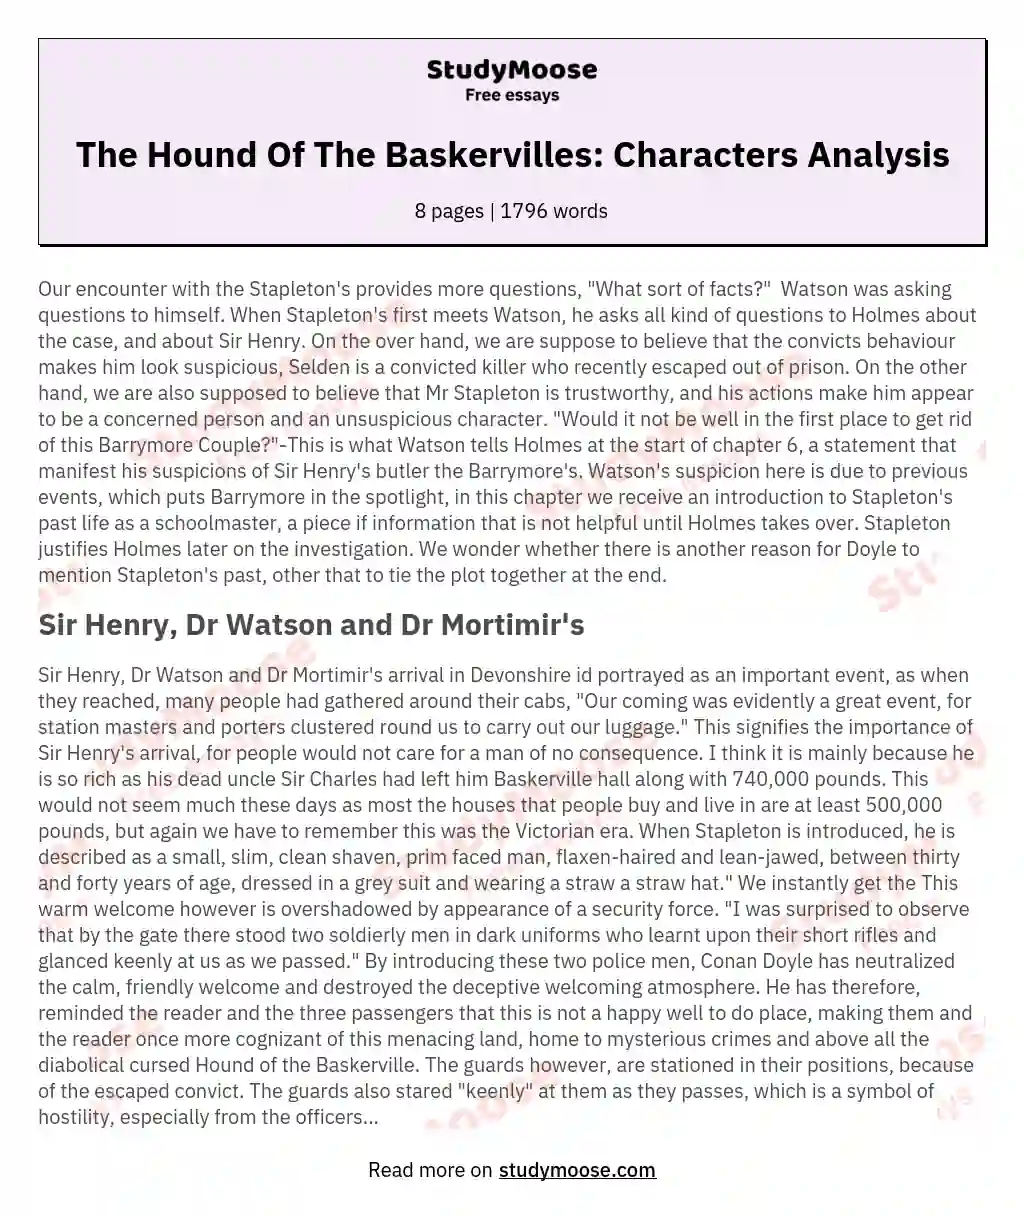 The Hound Of The Baskervilles: Characters Analysis